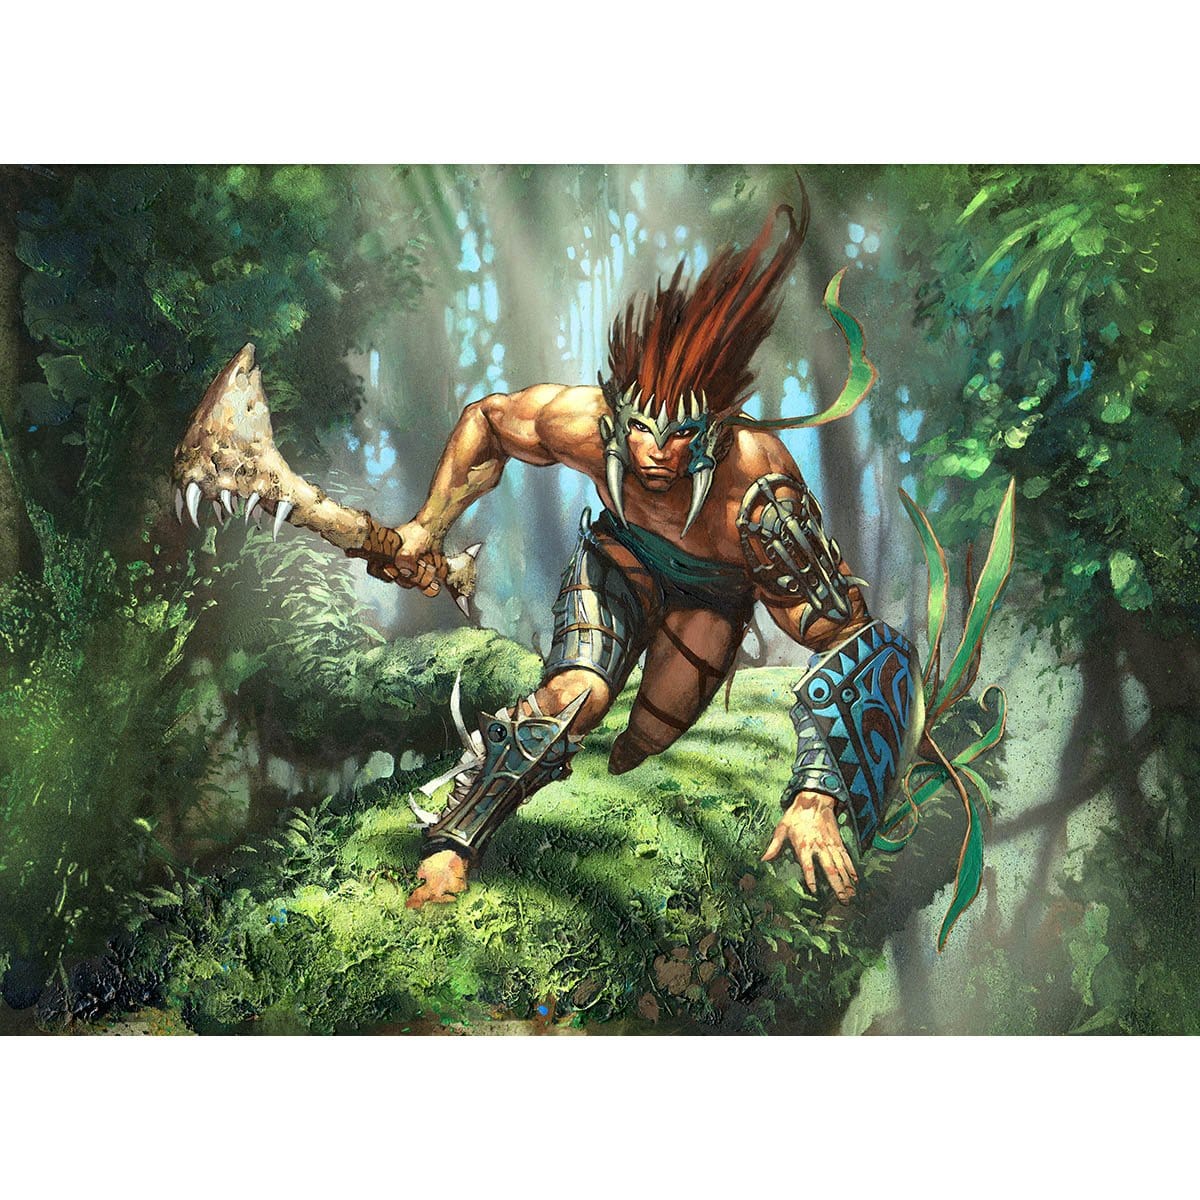 Drumhunter Print - Print - Original Magic Art - Accessories for Magic the Gathering and other card games